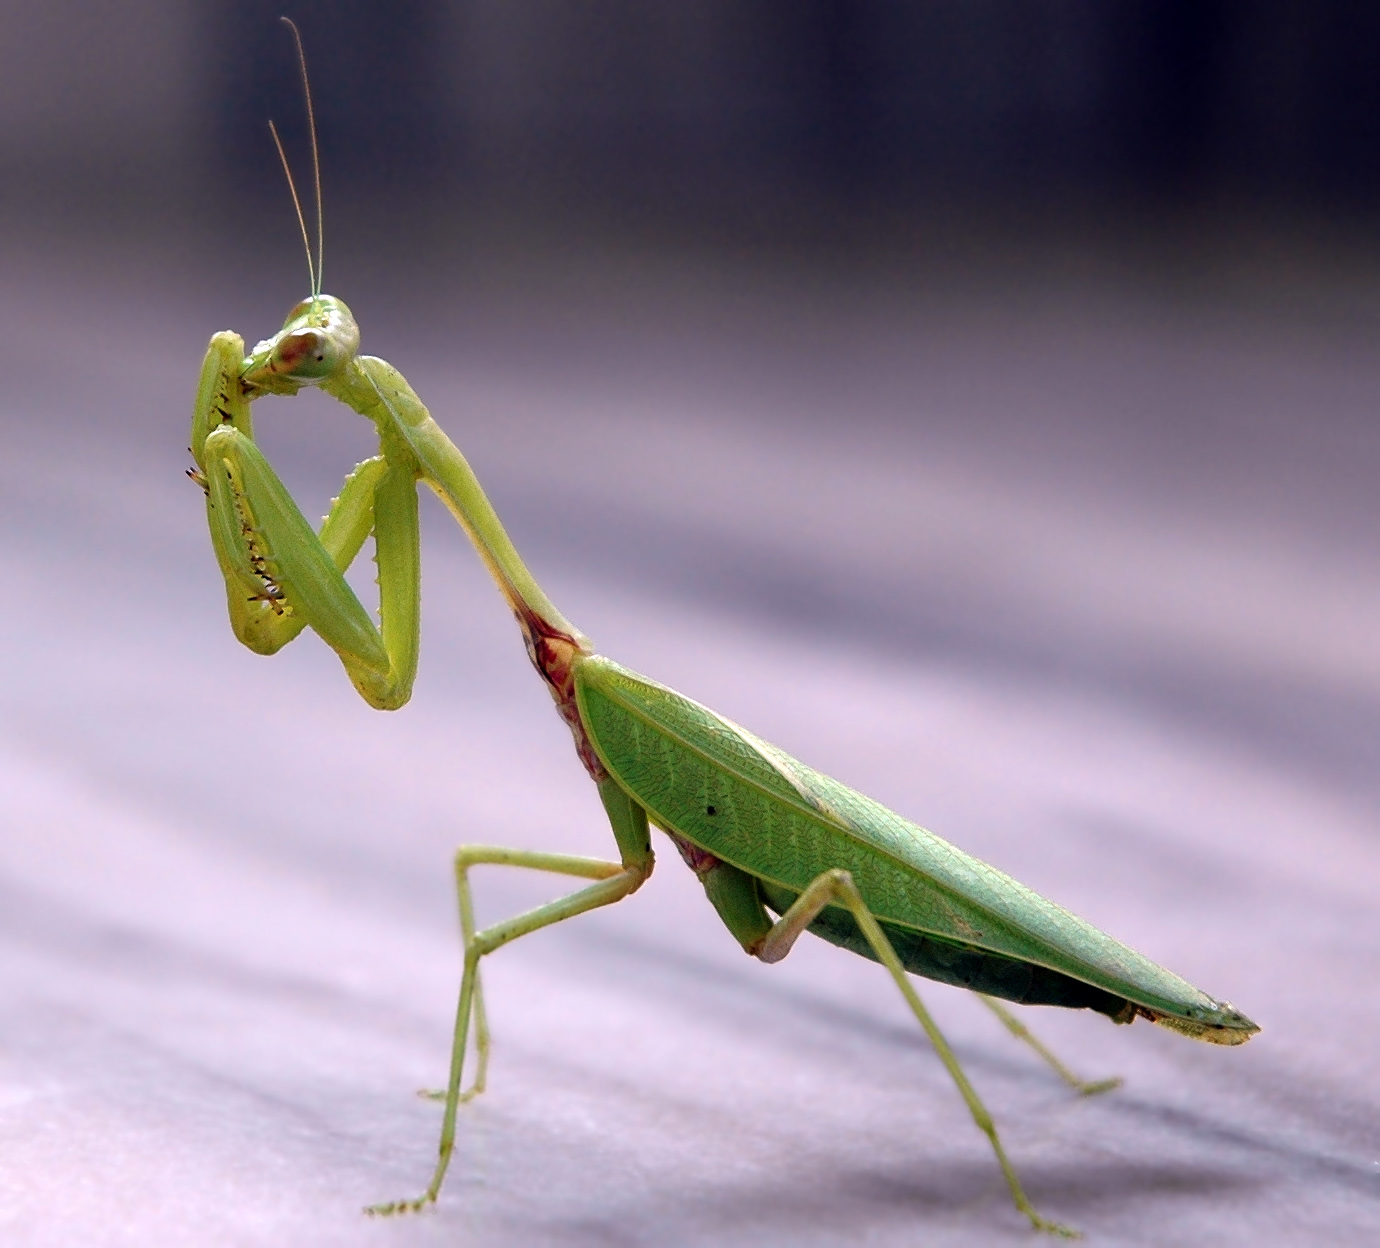 This mantis is grooming itself